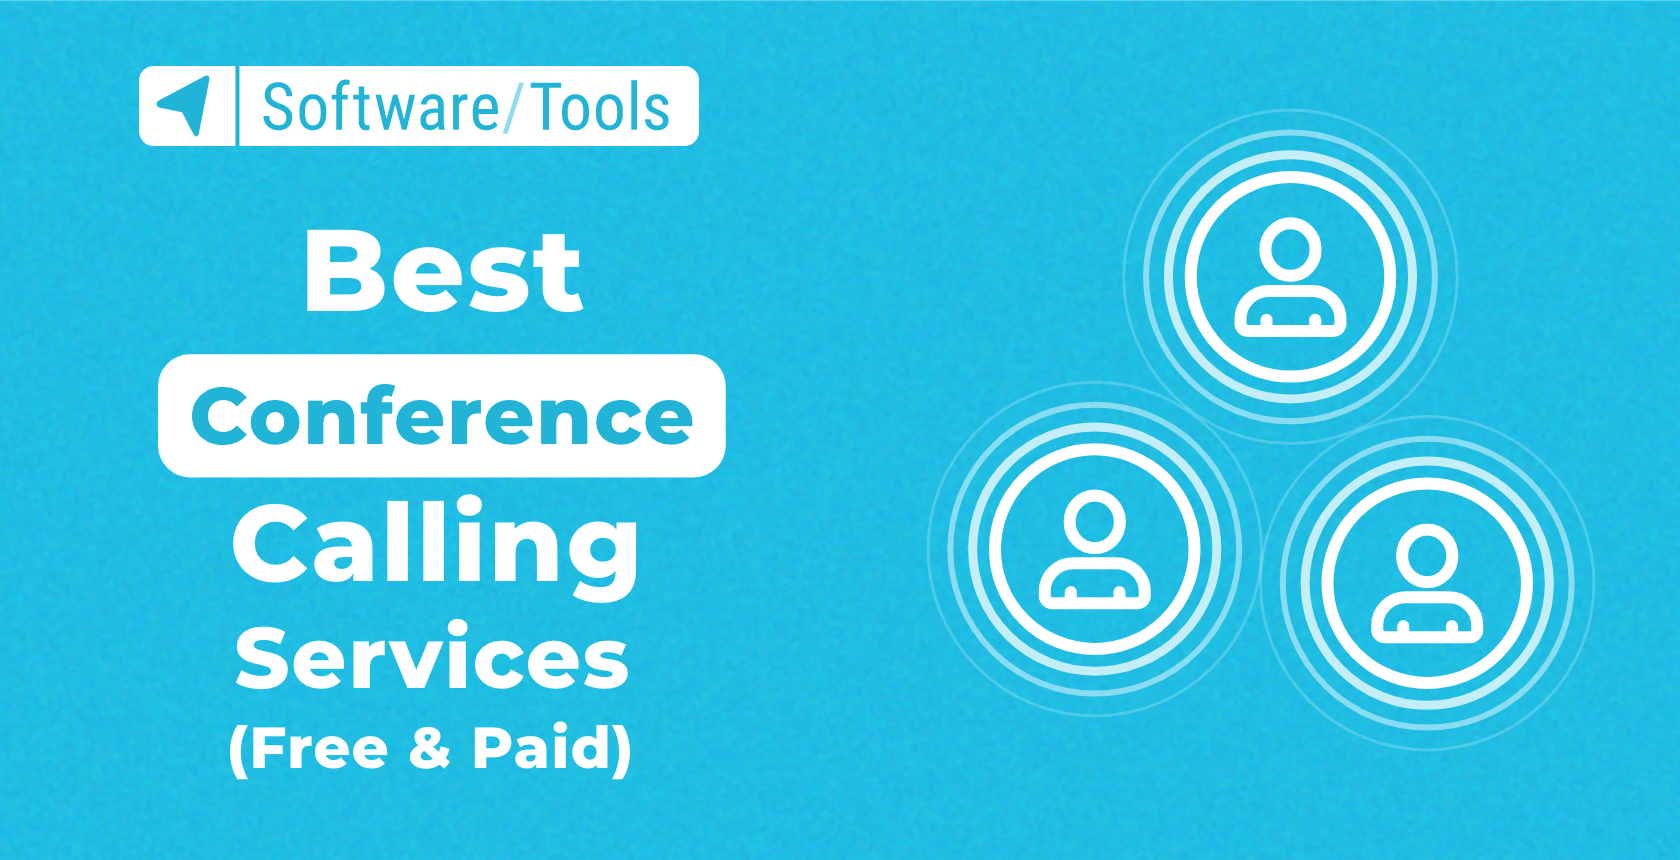 The Best Conference Calling Services (Free & Paid) for 2023